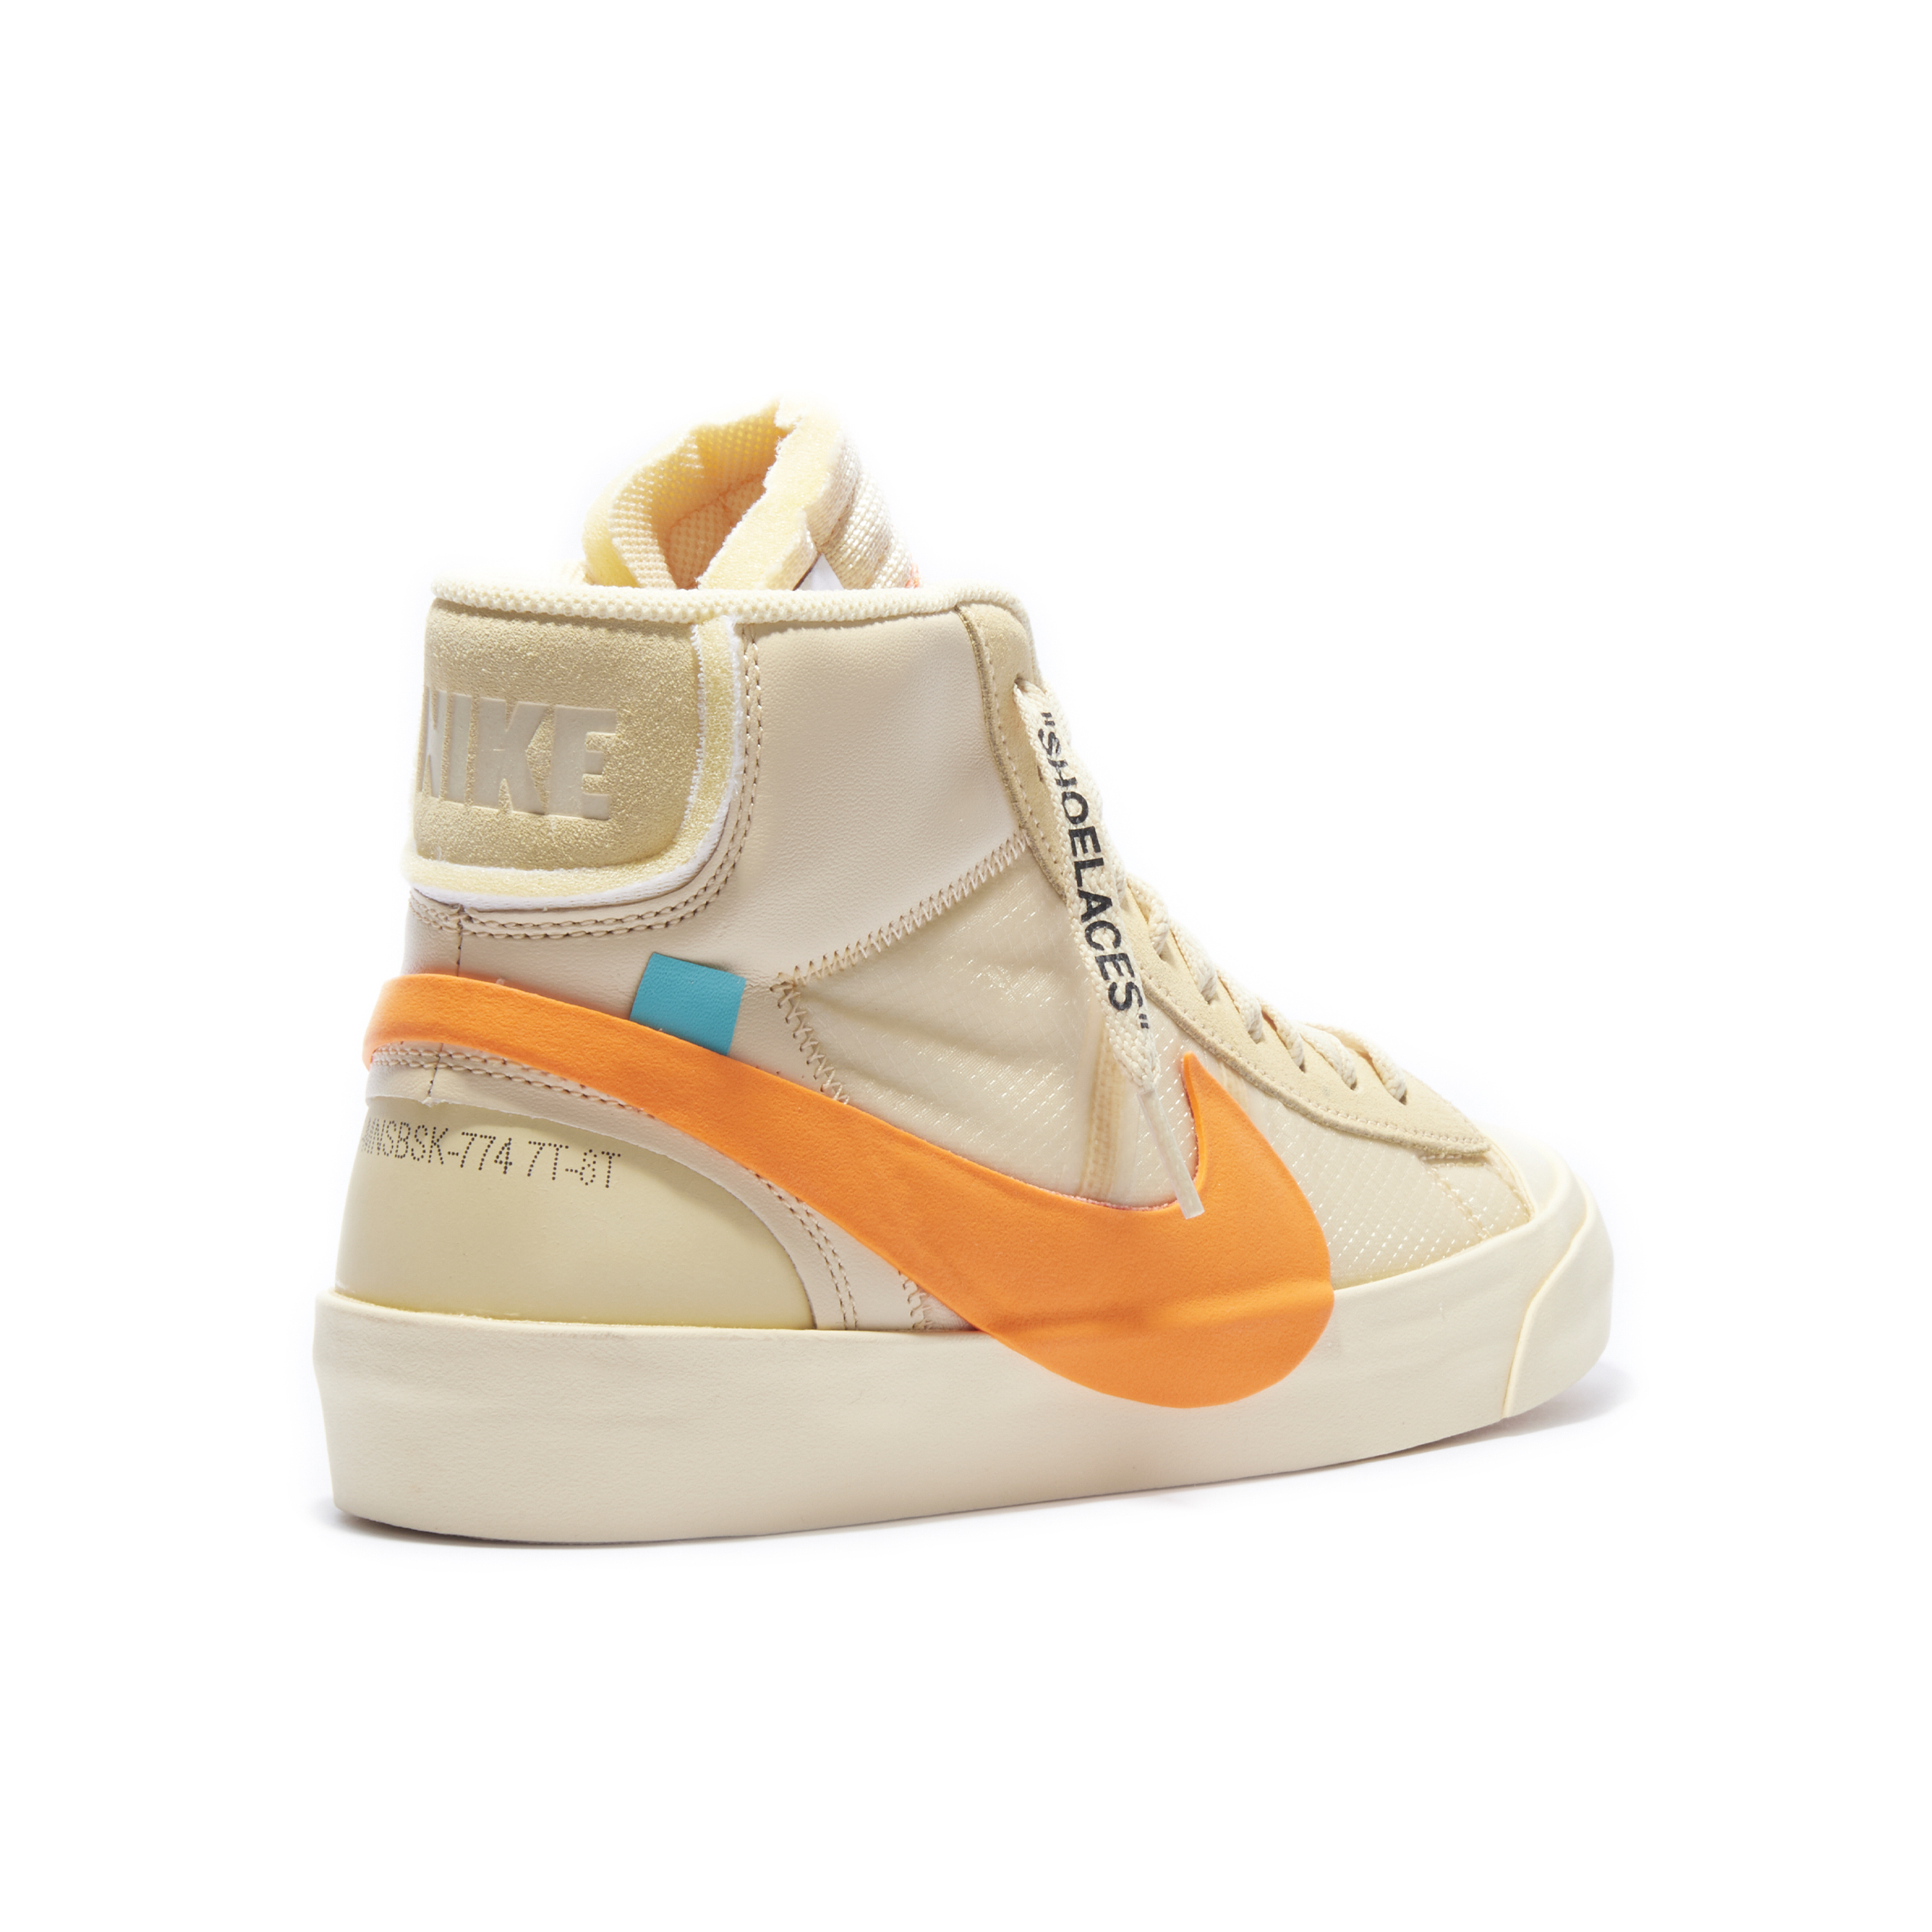 Blazer Mid All Hallows Eve x Off-White | AA3832-700 | Laced